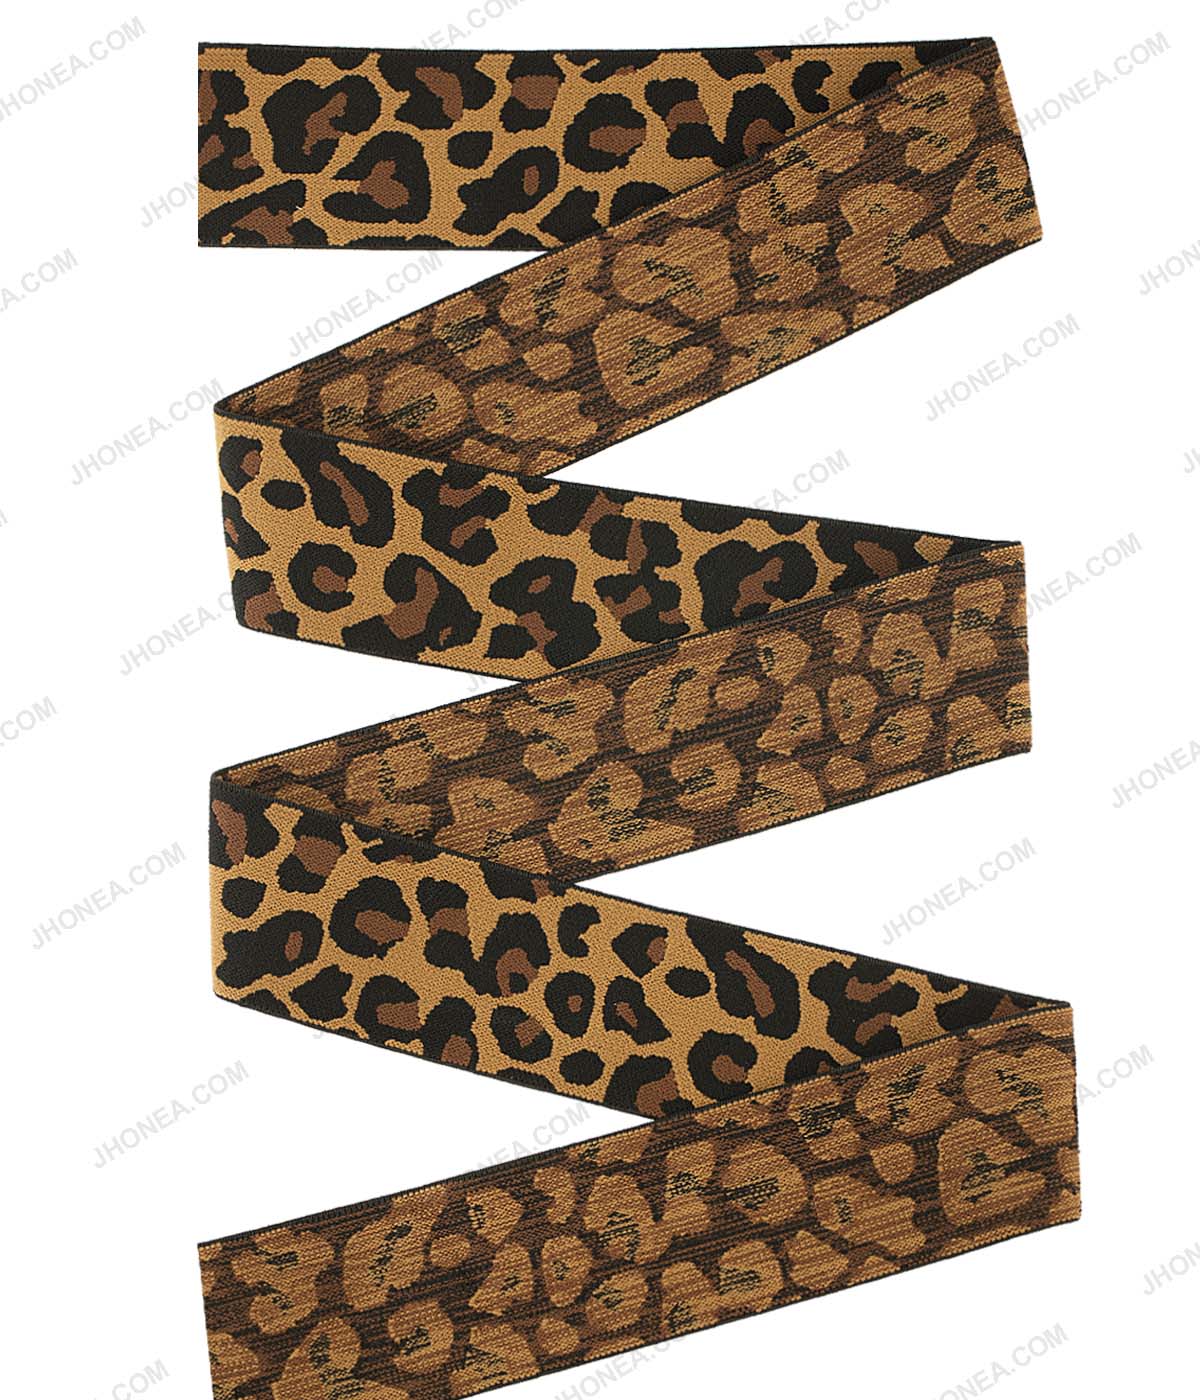 5cm (2inch) Black with Brown Leopard Print Soft Woven Elastic